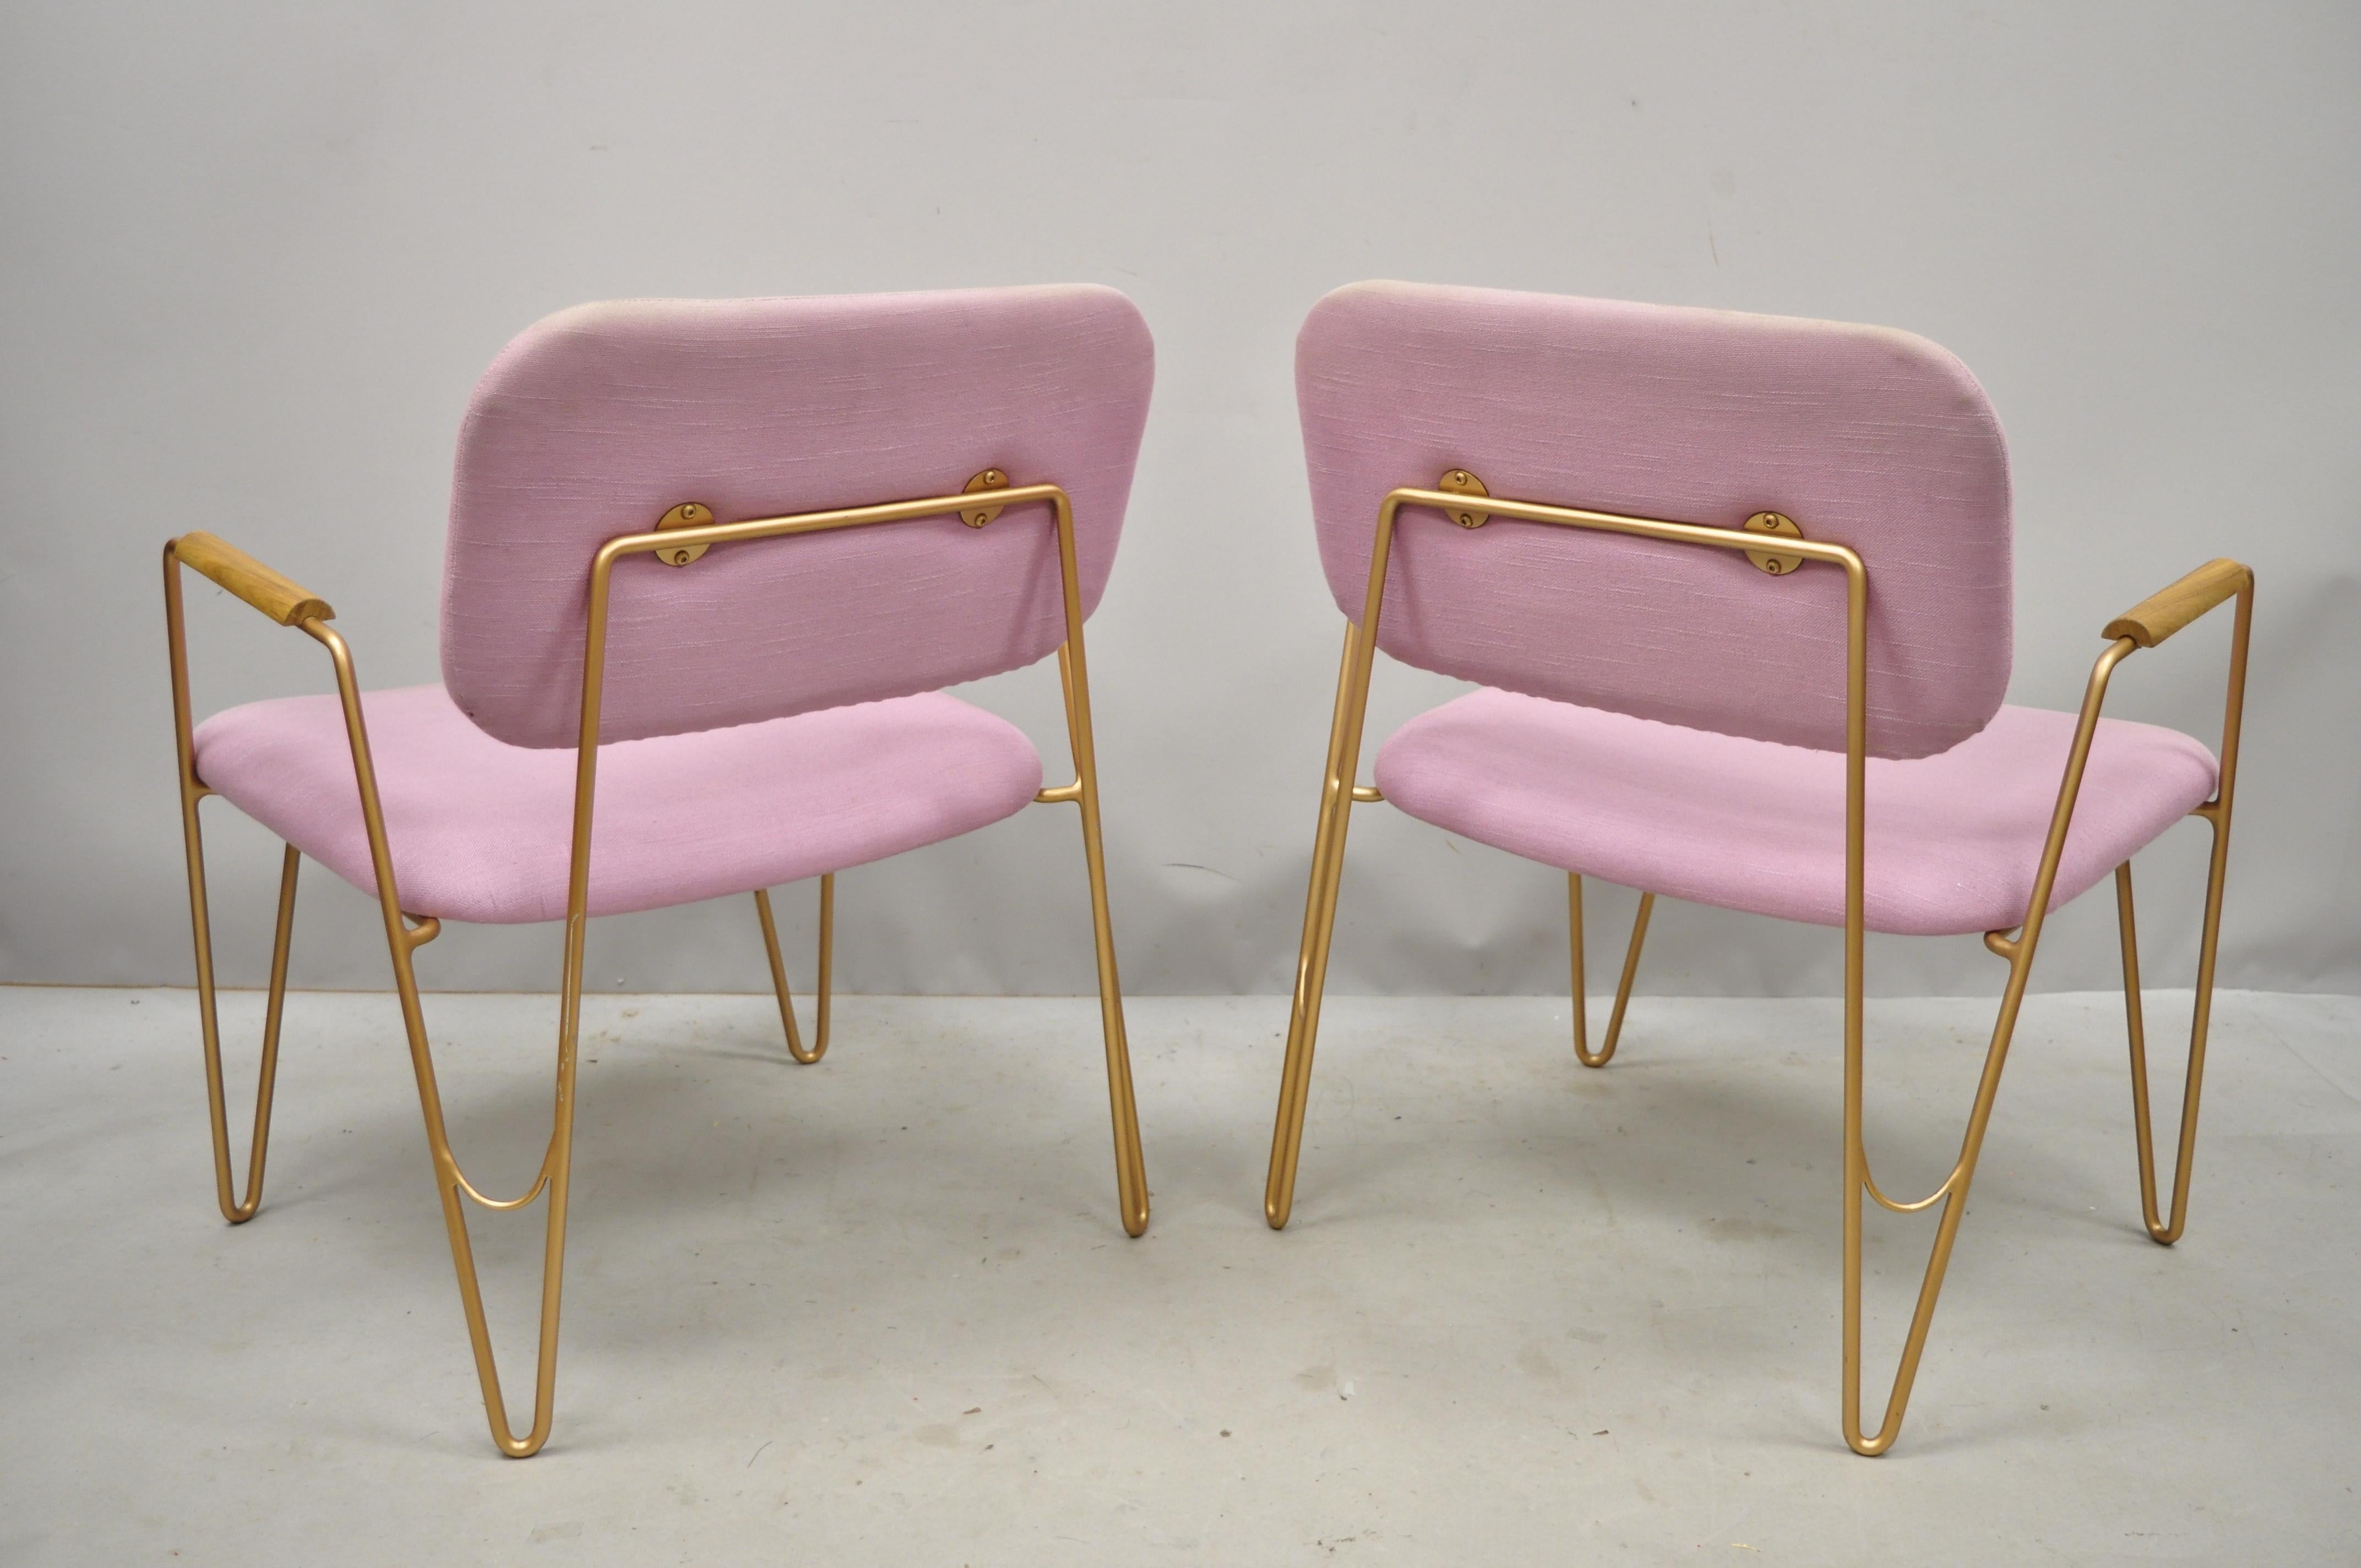 Pair of contemporary modern purple gold metal hairpin leg lounge armchairs. Listing includes a metal frame, clean modernist lines, sleek sculptural form, circa 21st century, Pre-owned. Measurements: 32